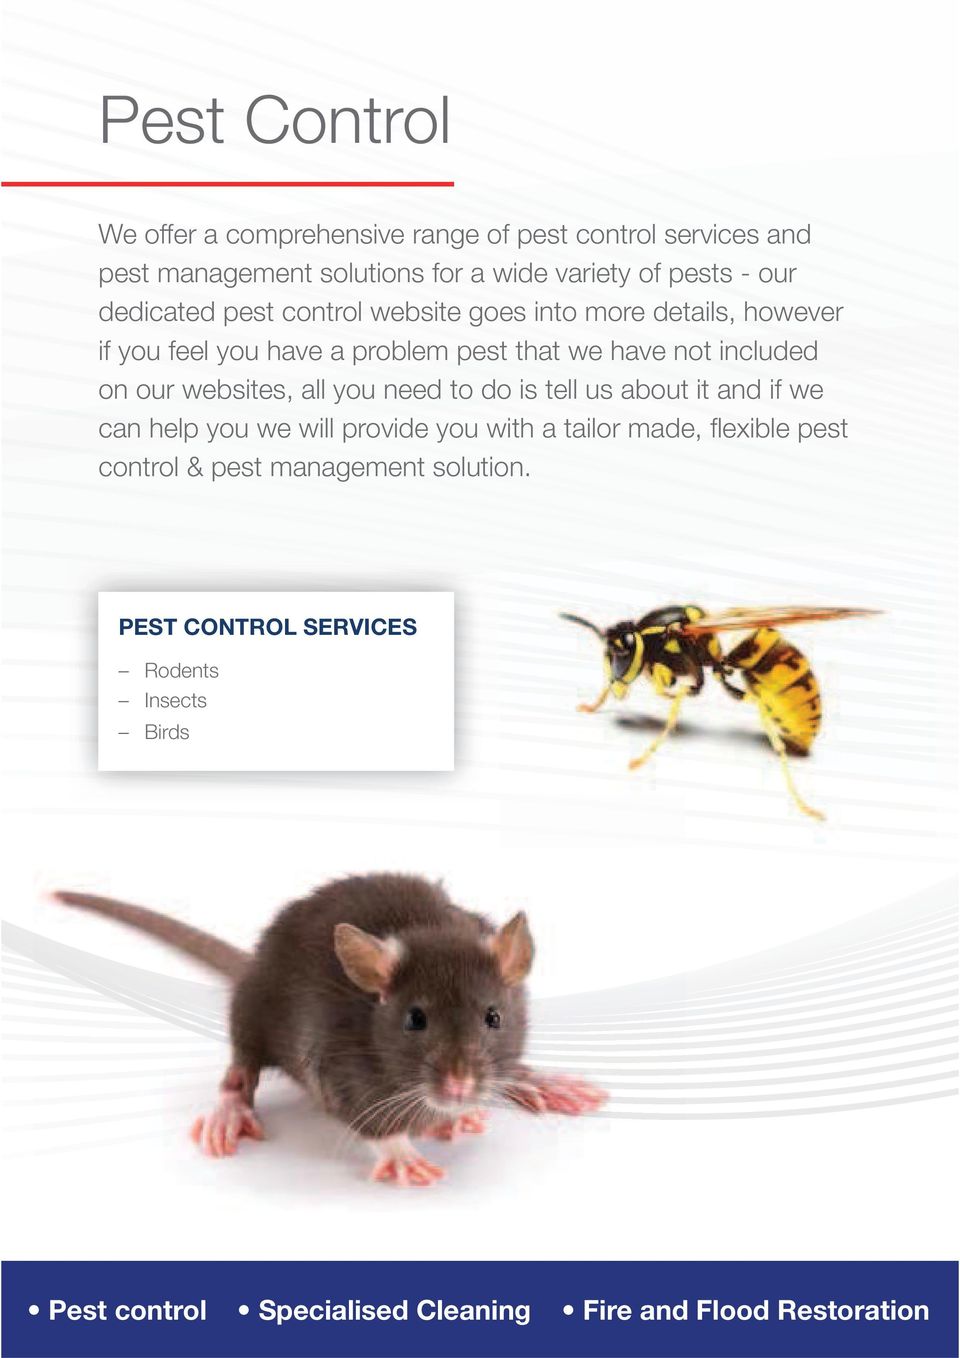 problem pest that we have not included on our websites, all you need to do is tell us about it and if we can